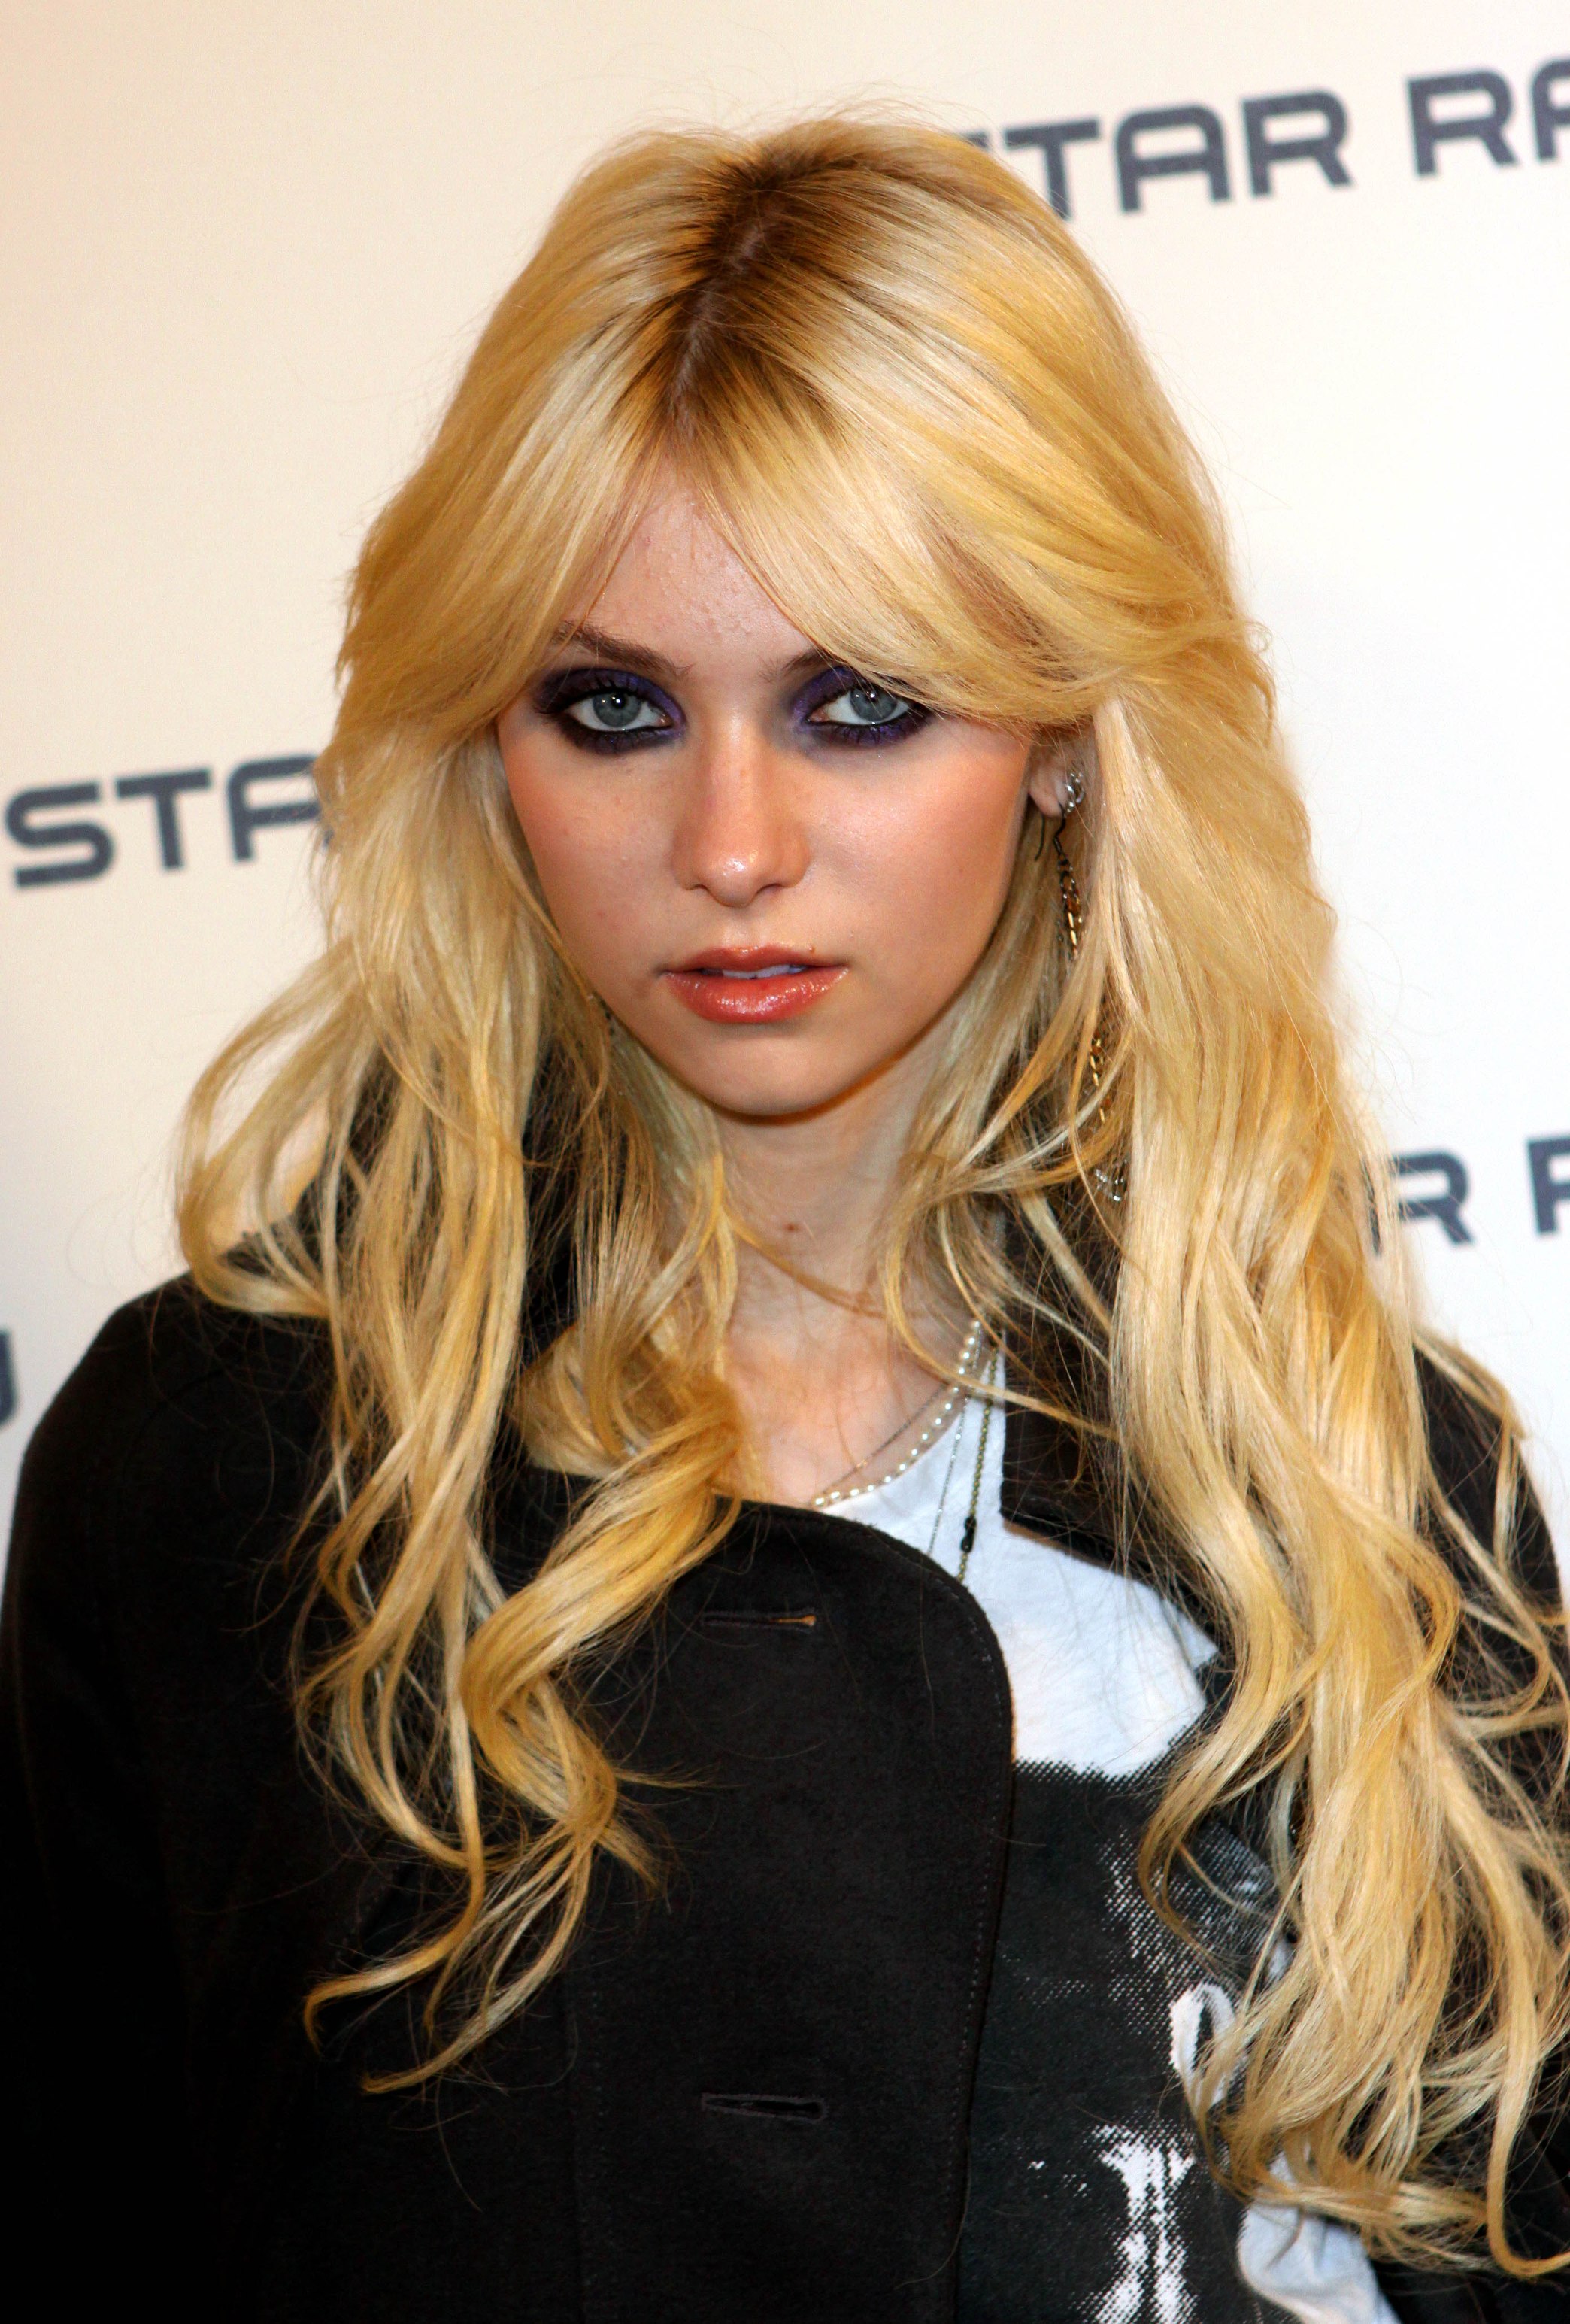 Taylor Momsen photo 36 of 348 pics, wallpaper - photo #200010 - ThePlace2